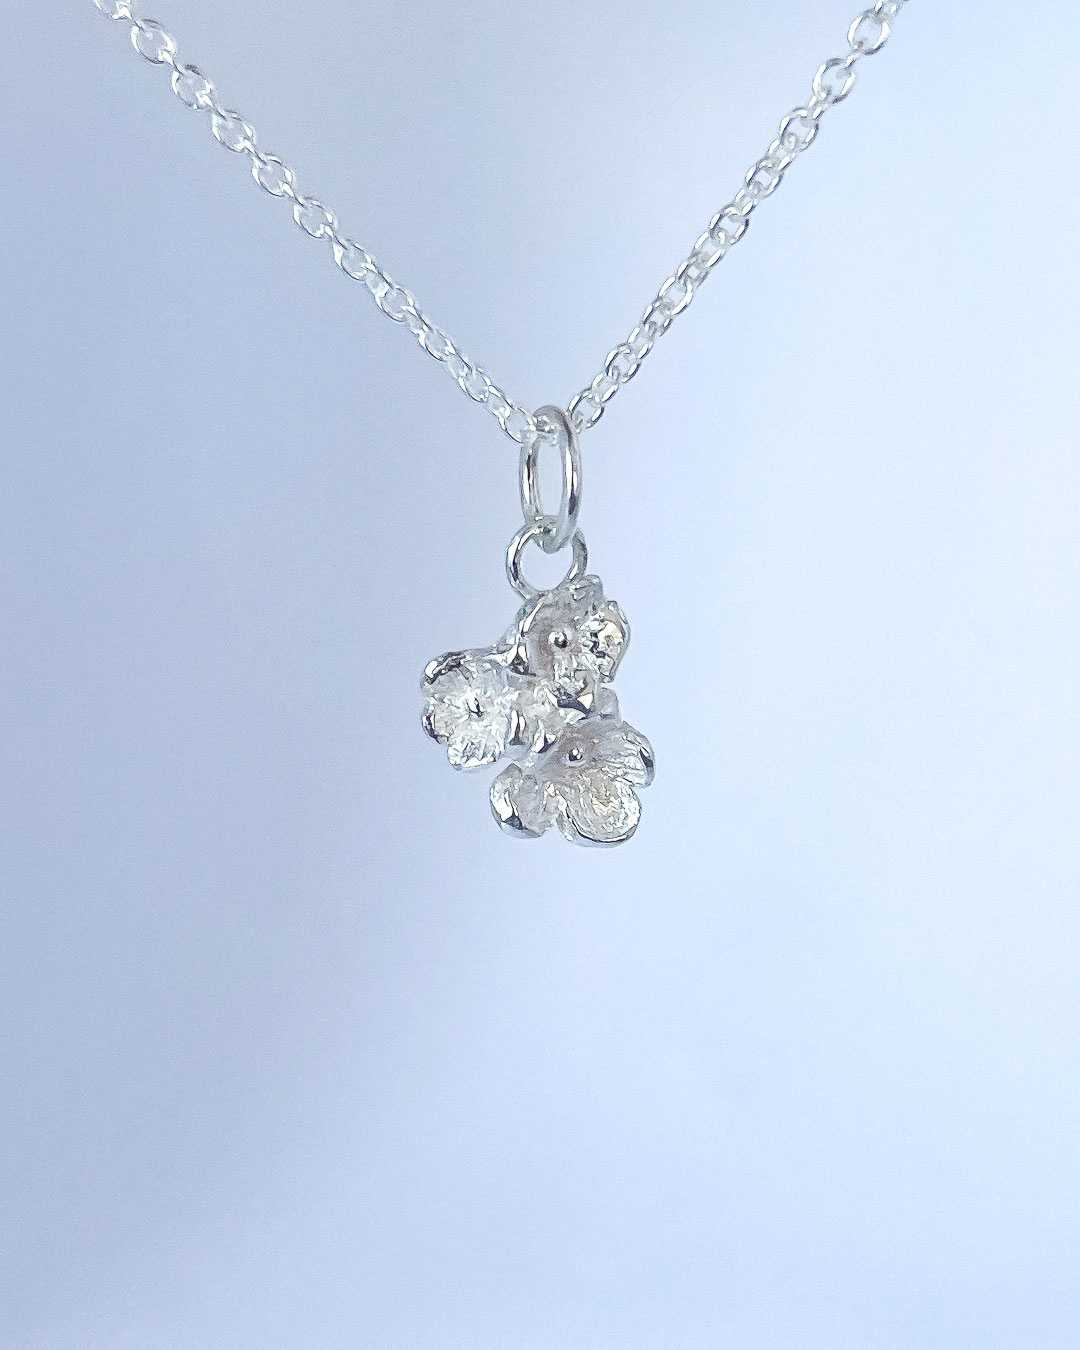 A close up of the Dainty Flower Bouquet of three sterling silver flowers hanging from a Sterling Silver Chain